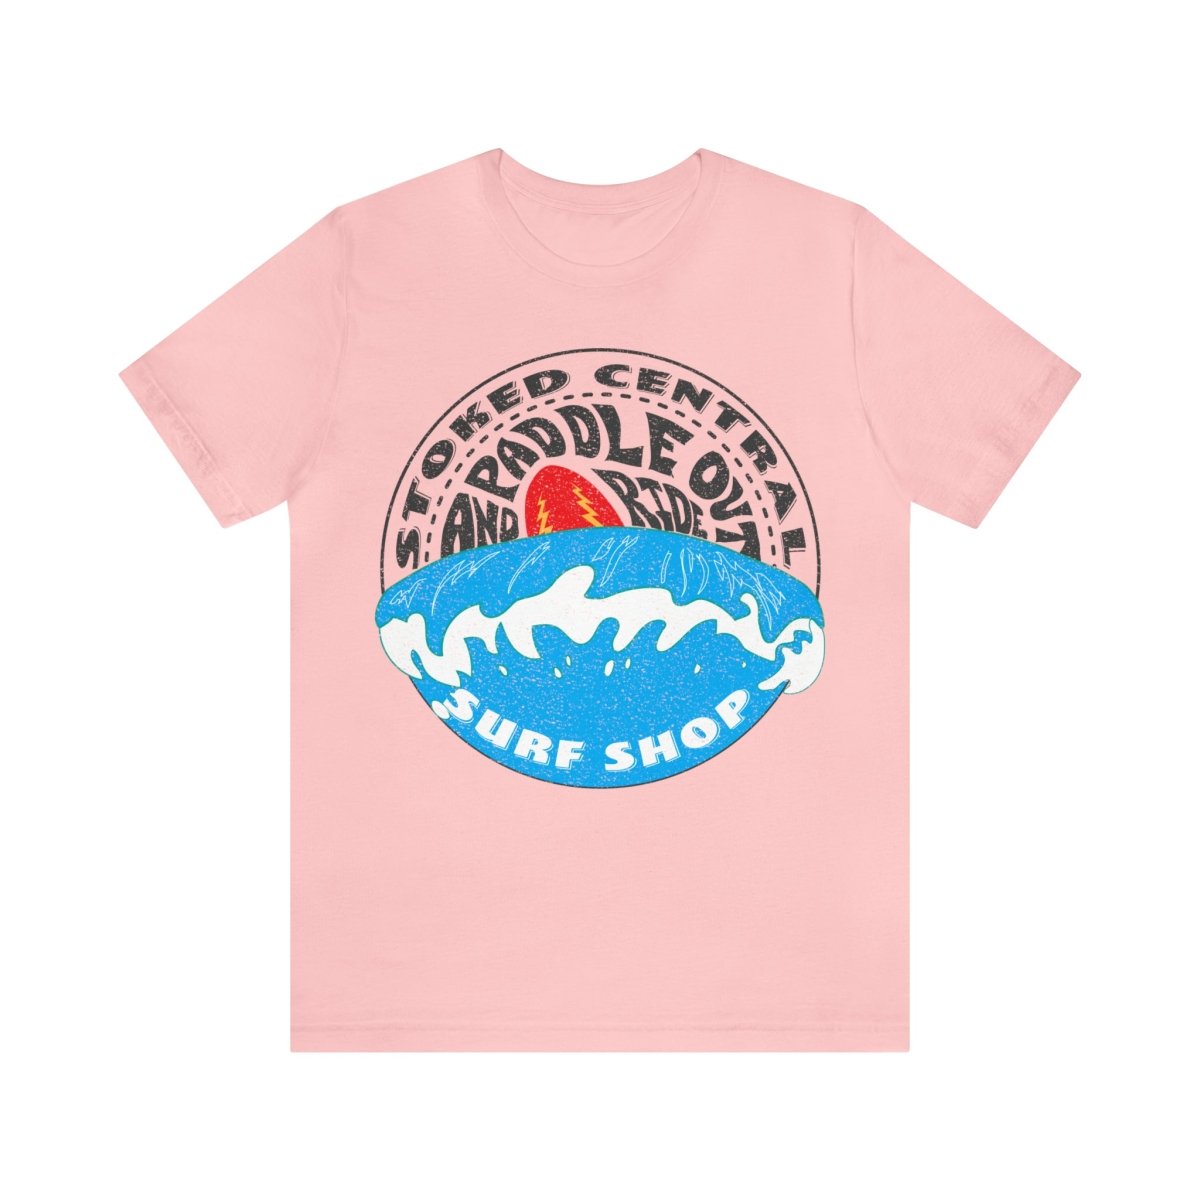 Stoked Central Surf Shop Paddle Out Premium T-Shirt, Malibu, California